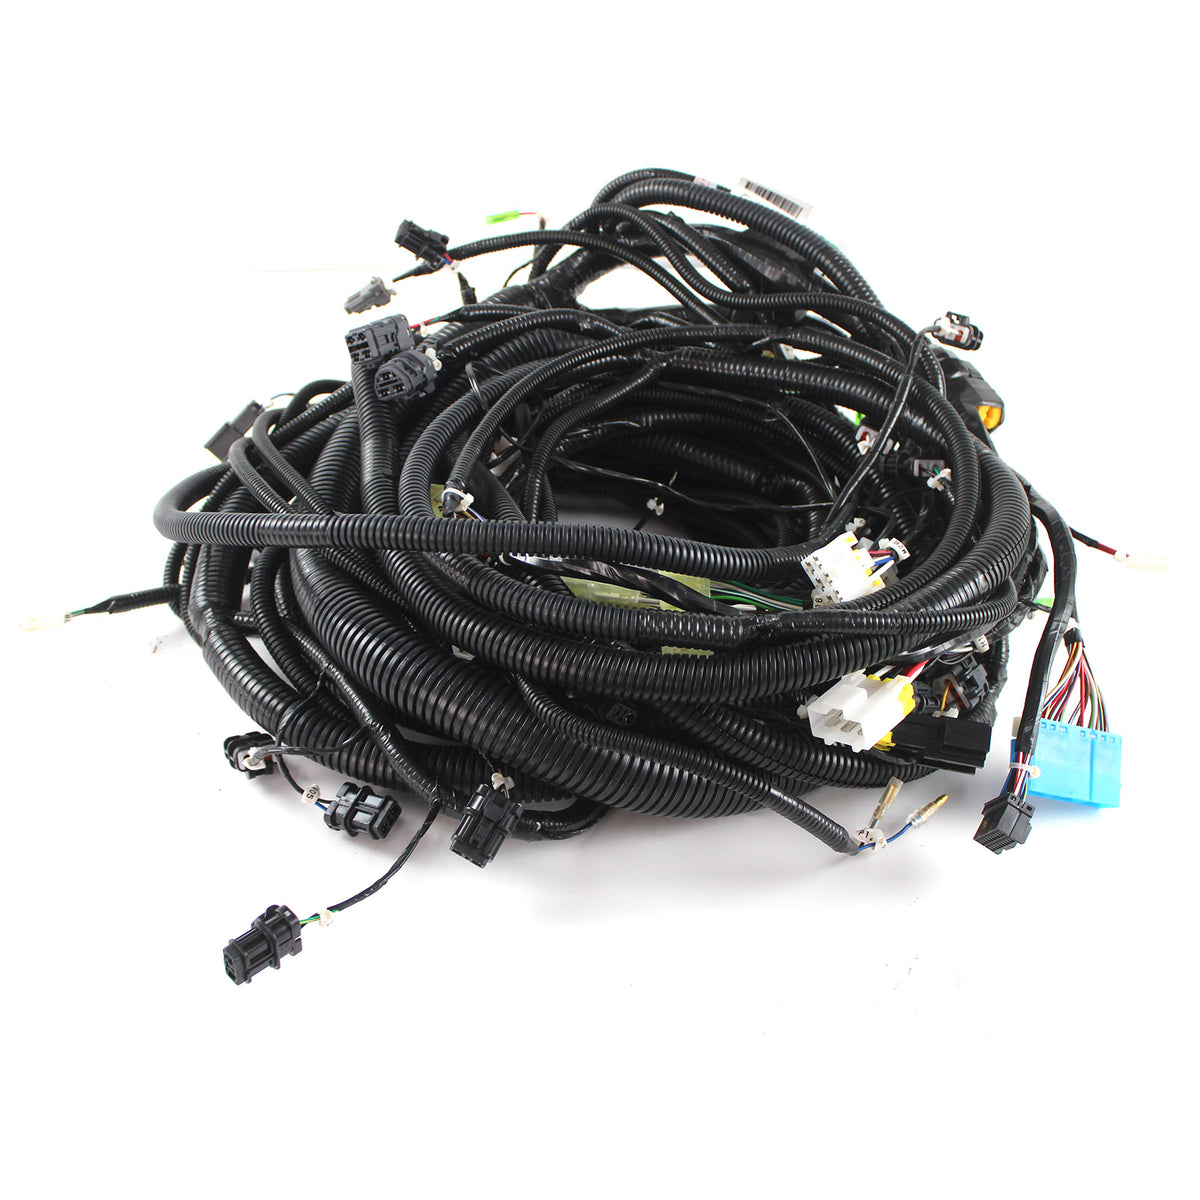 20Y-06-24911 20Y-06-24910 Wiring Harness for PC200-6 PC210-6 PC220-6